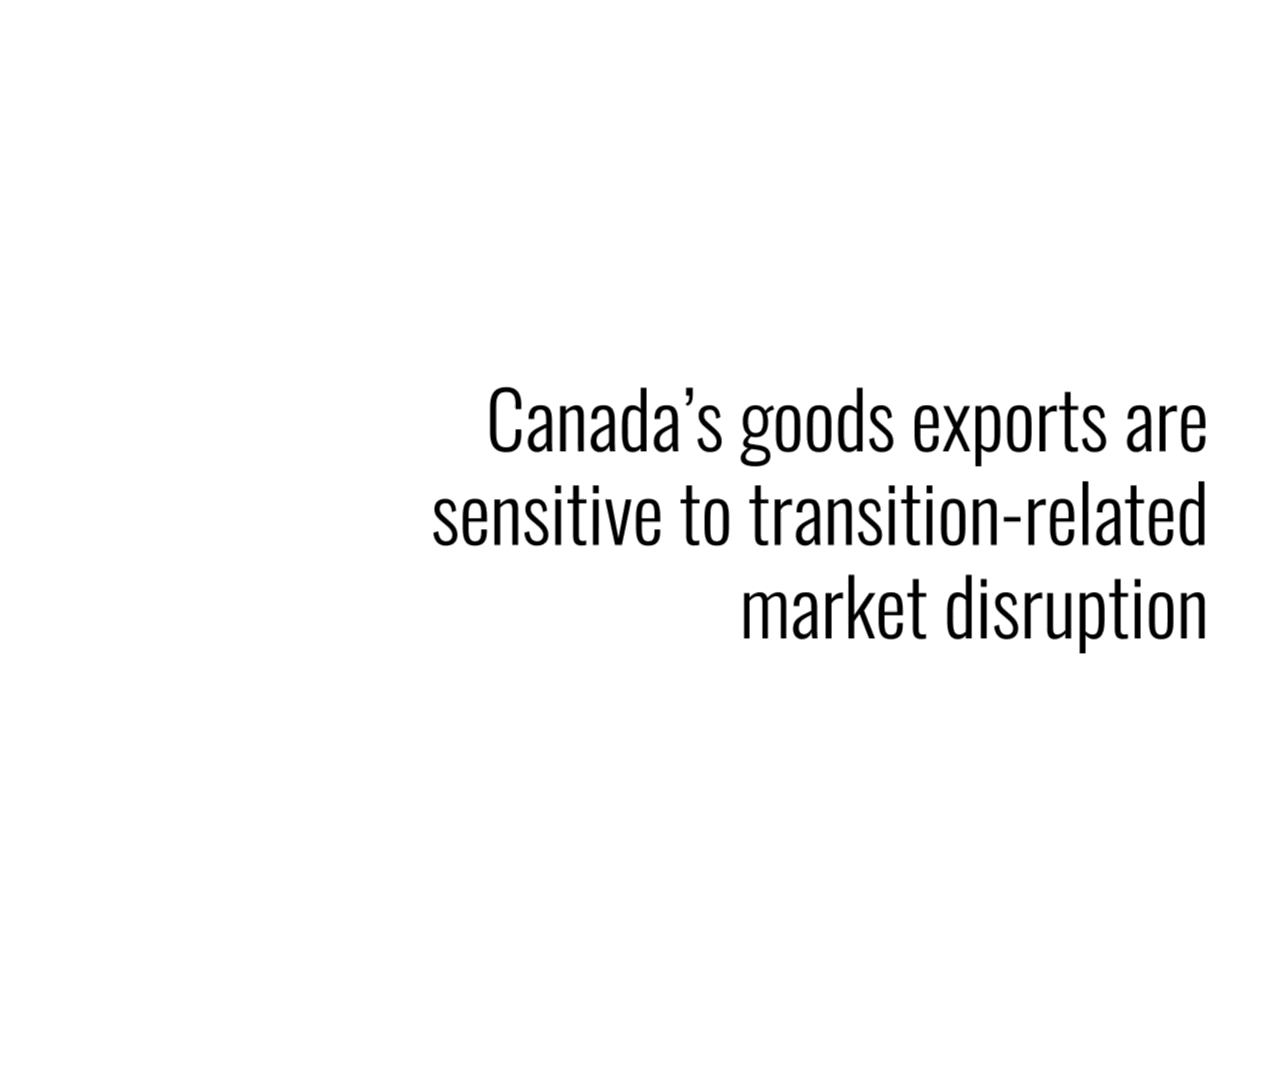 Animated version of the Voronoi graph representing the sensitivity of Canadian goods exports to market disruptions related to the transition. The orange shapes are animated by filling in a rectangle representing 70% of Canadian exports that are in sectors more vulnerable to change.